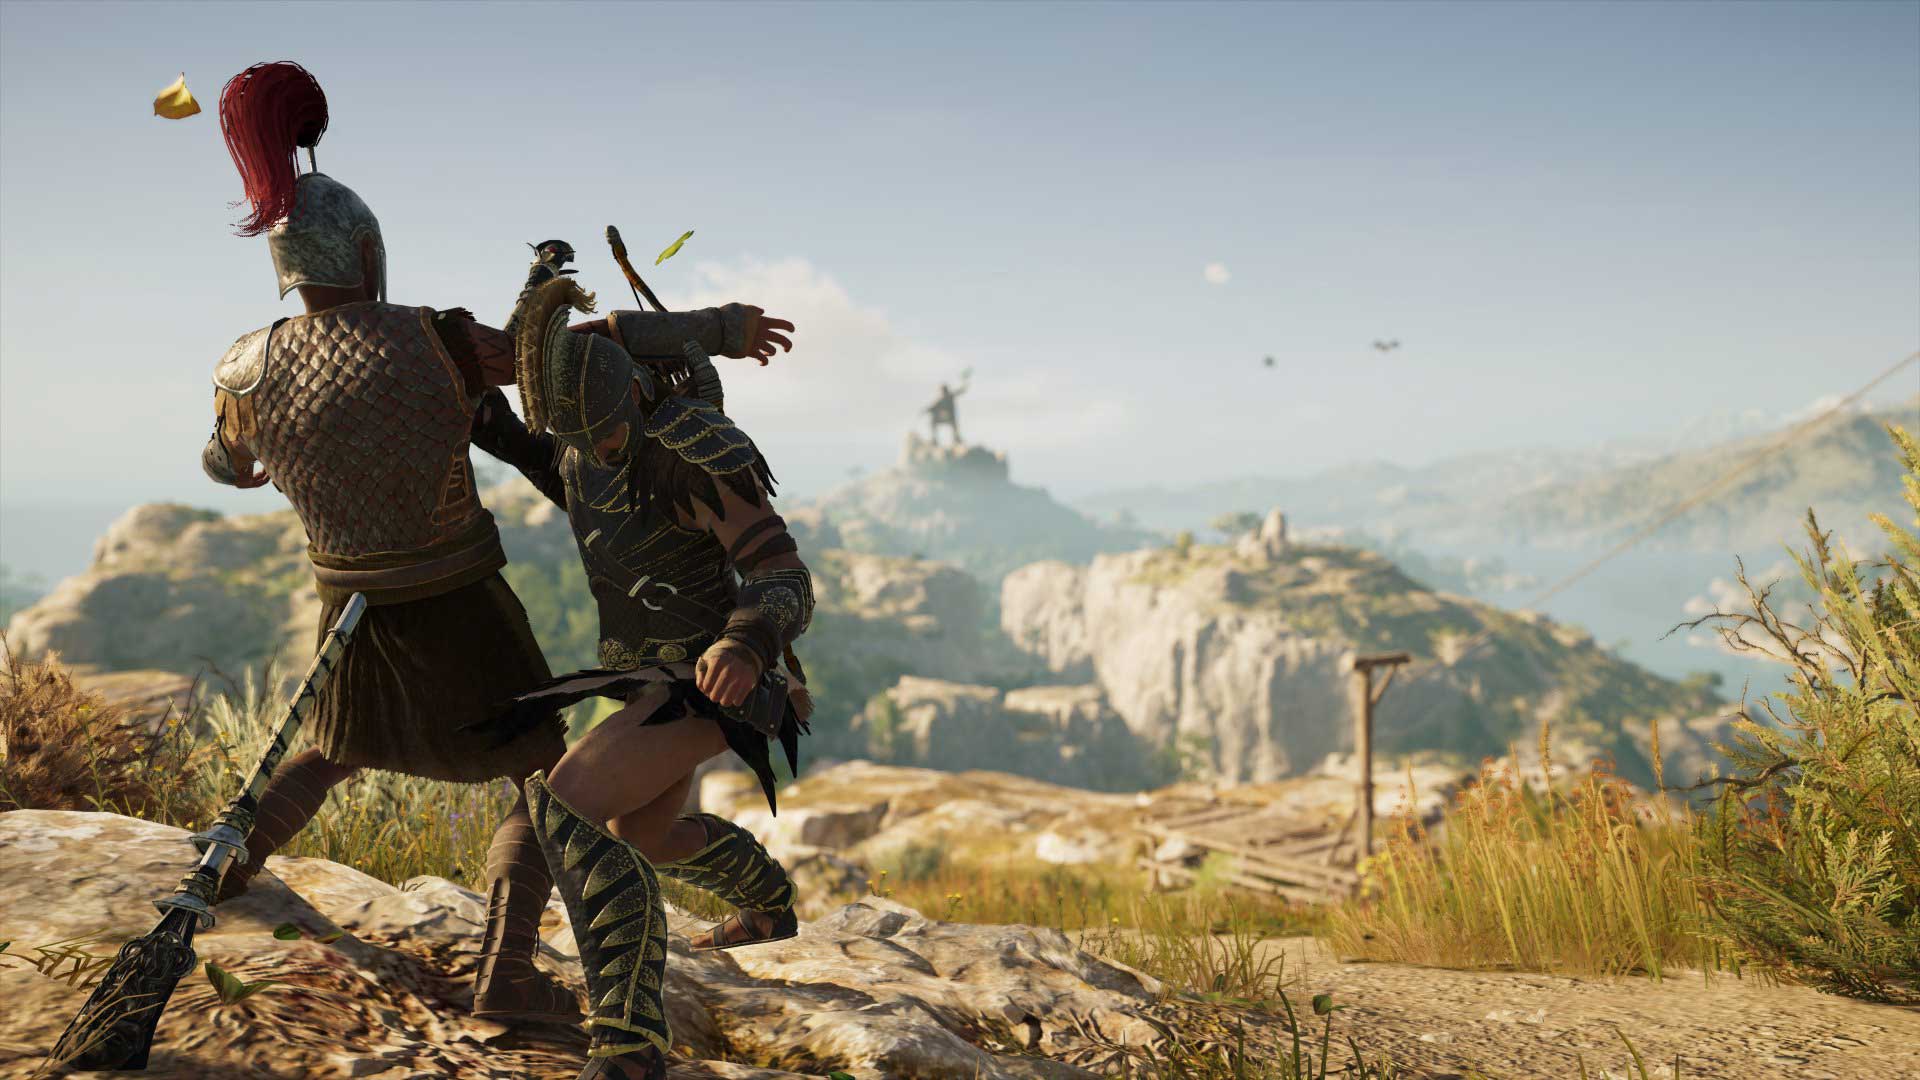 Test d'Assassin's Creed Odyssey